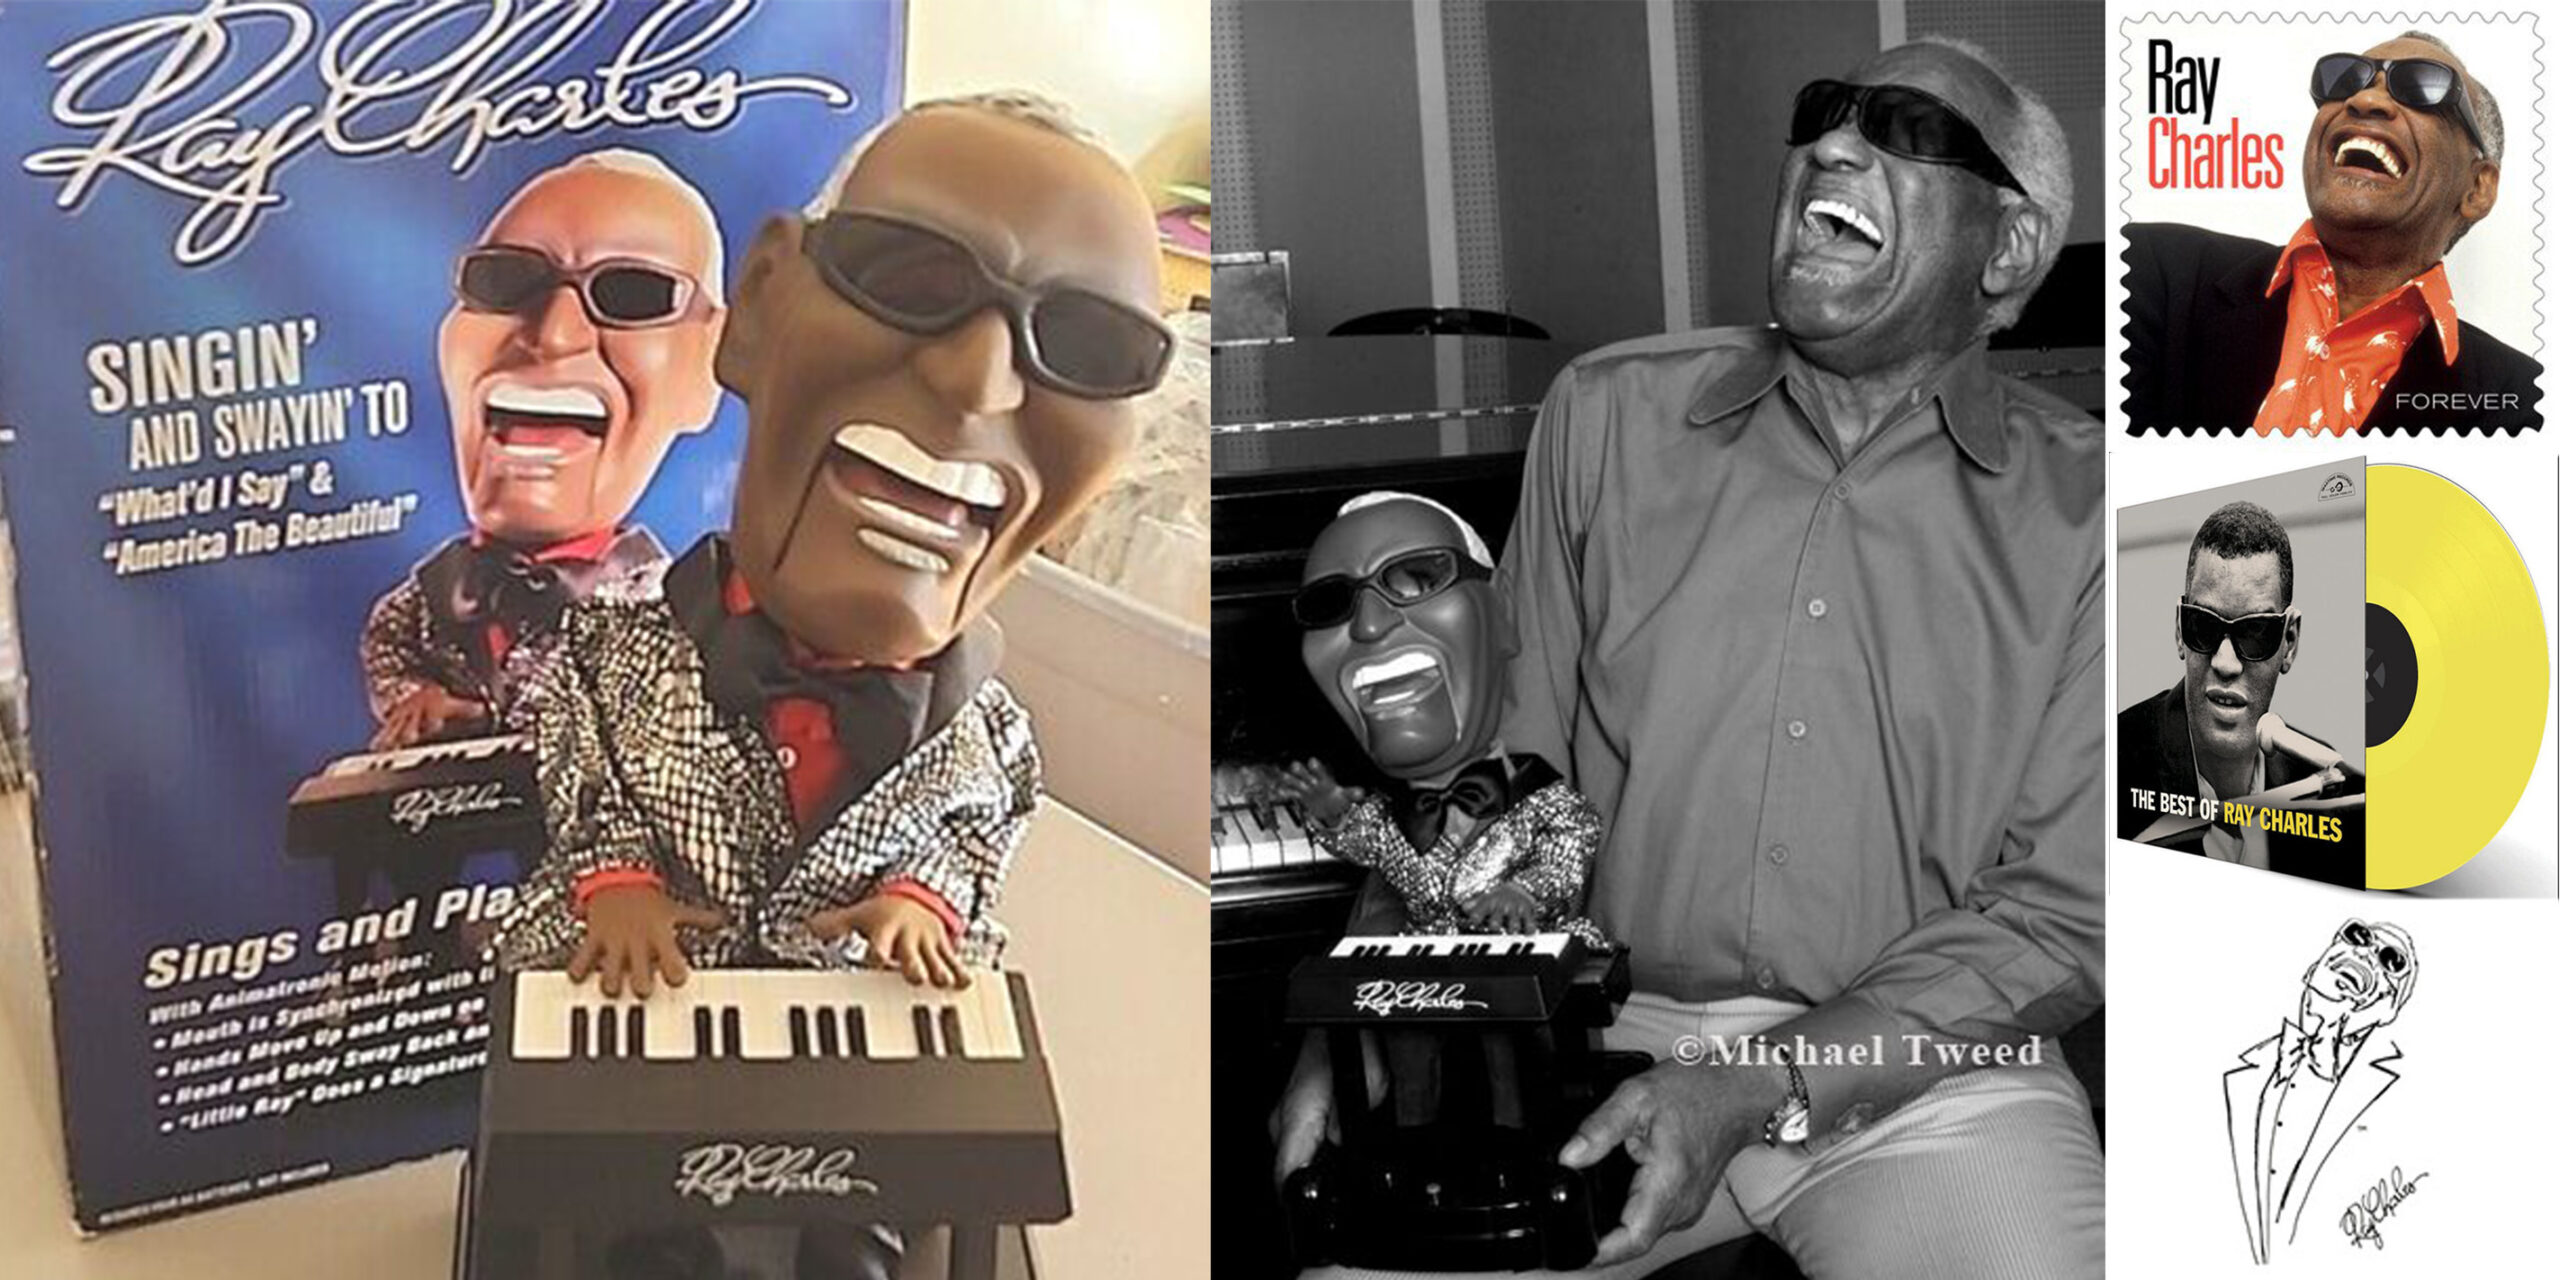 Ray Charles with his Doll and Symbol